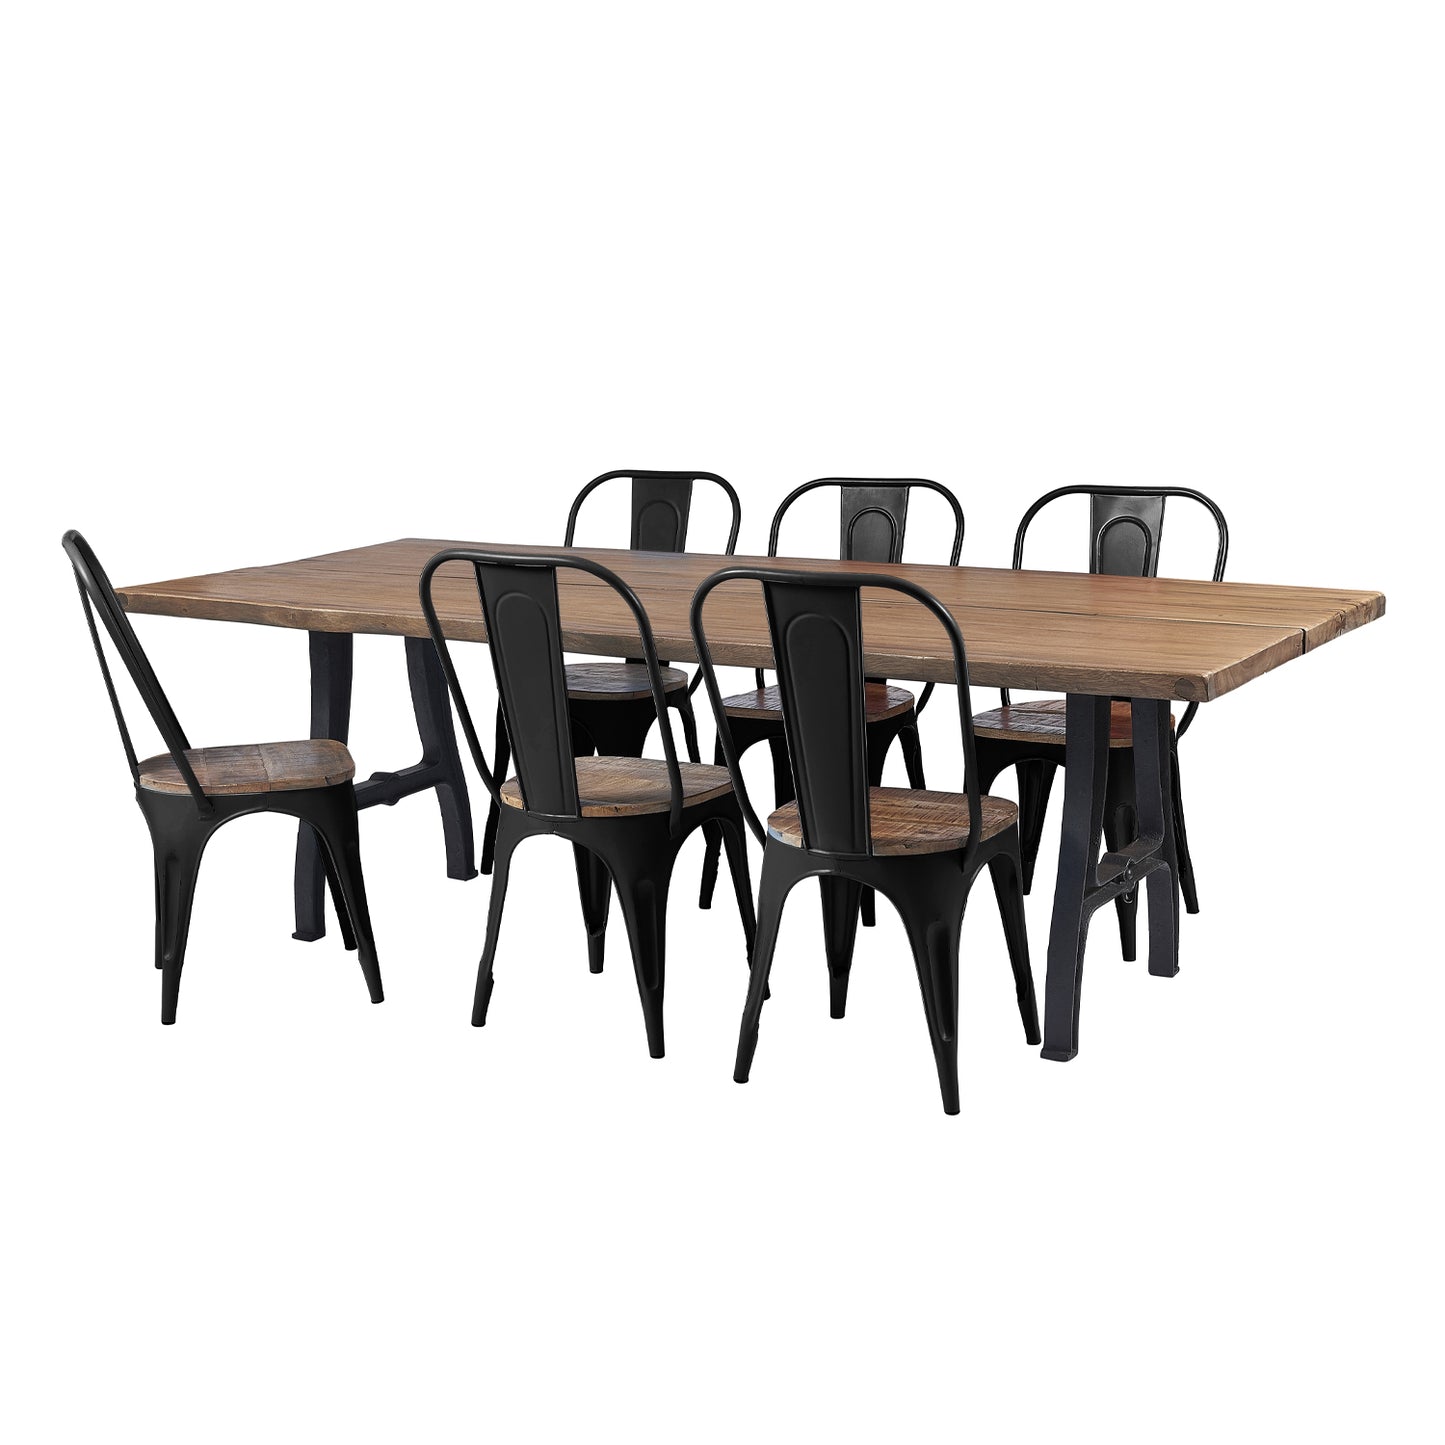 Monks Gate - 220cm Dining Table